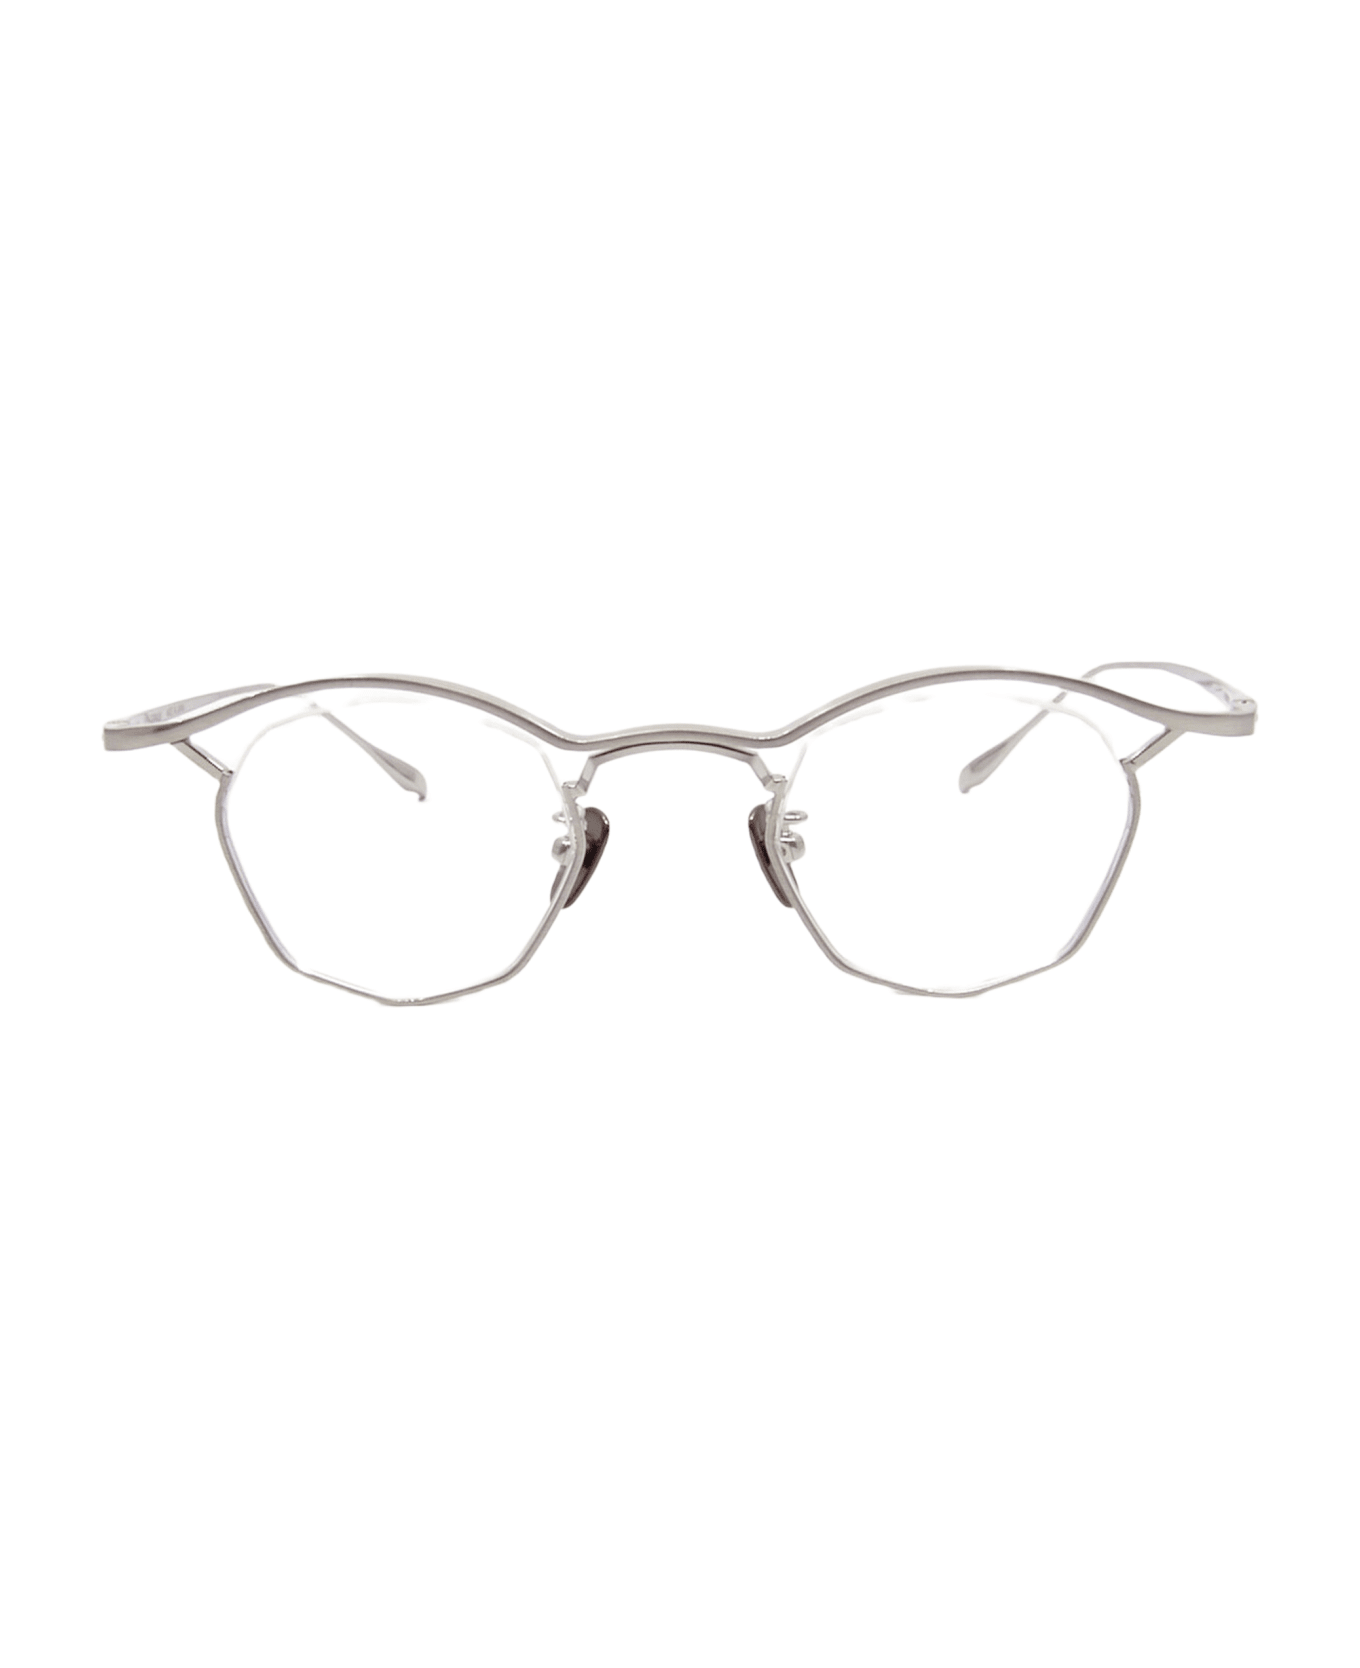 FACTORY900 Titanos X Factory900 Mf-002 - Silver Rx Glasses - Silver アイウェア